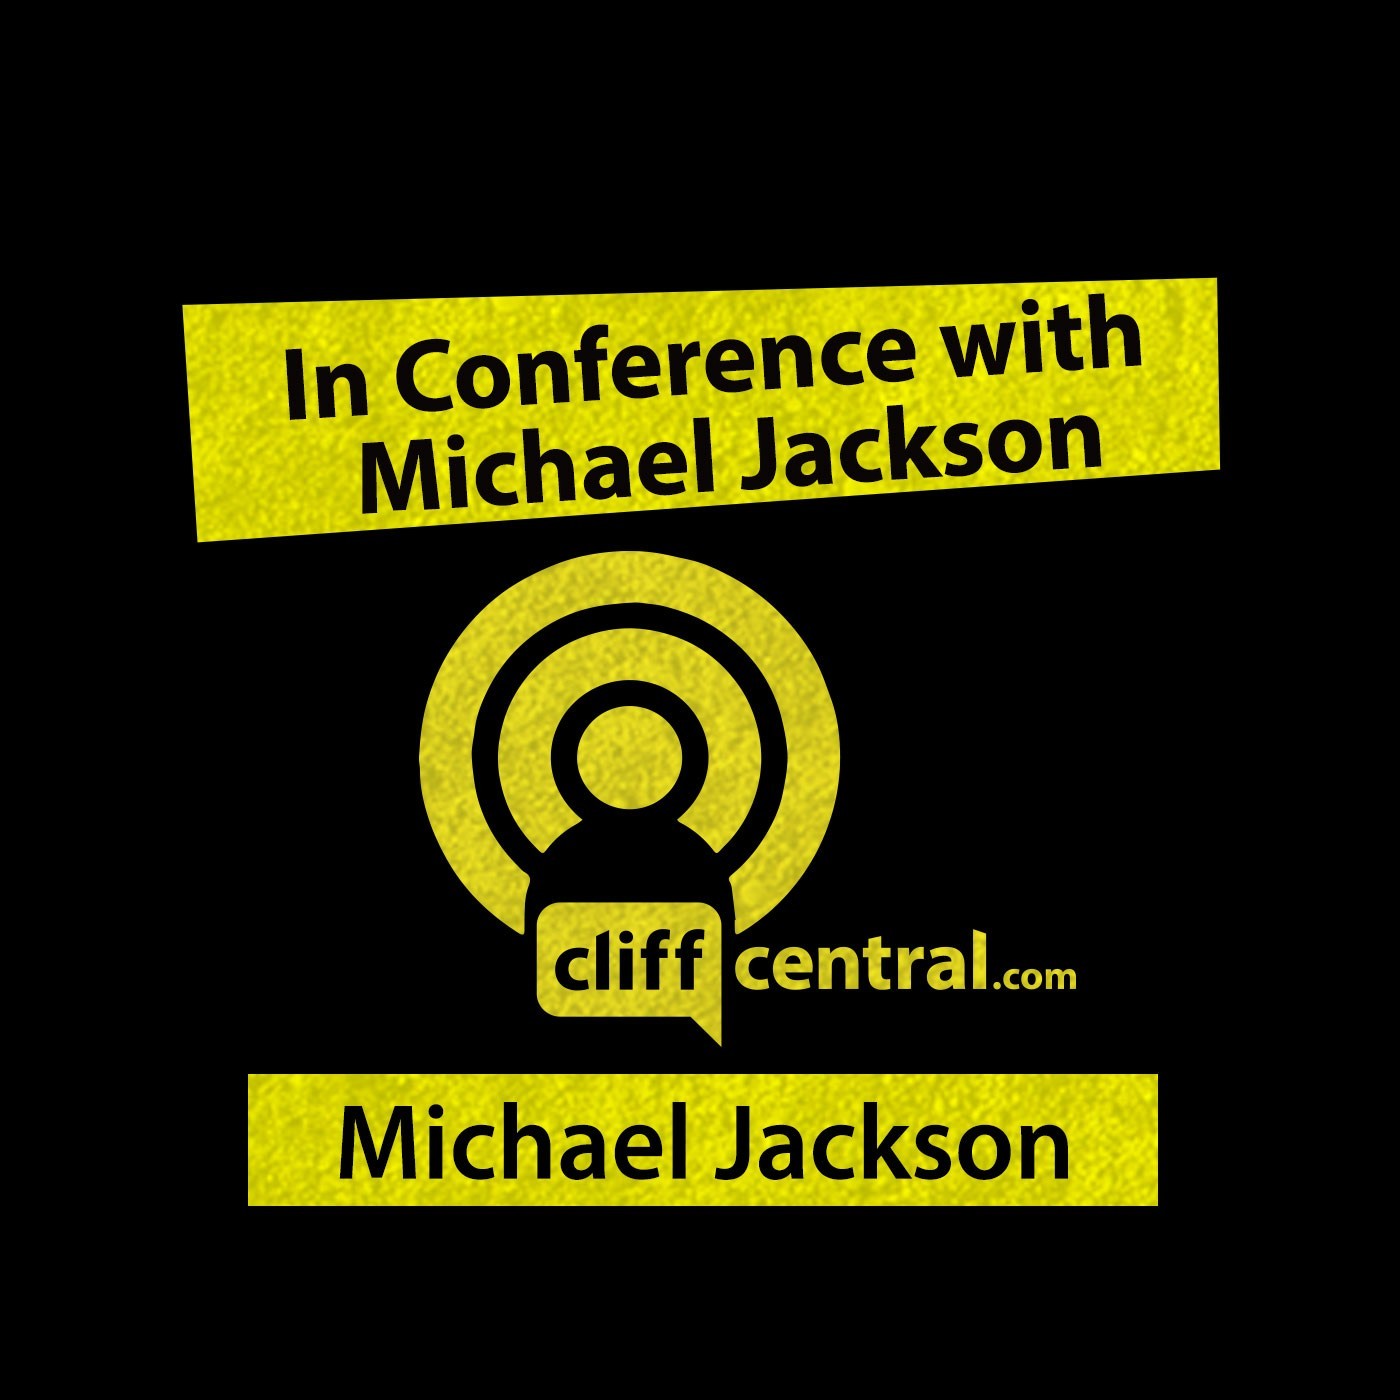 In Conference with Michael Jackson